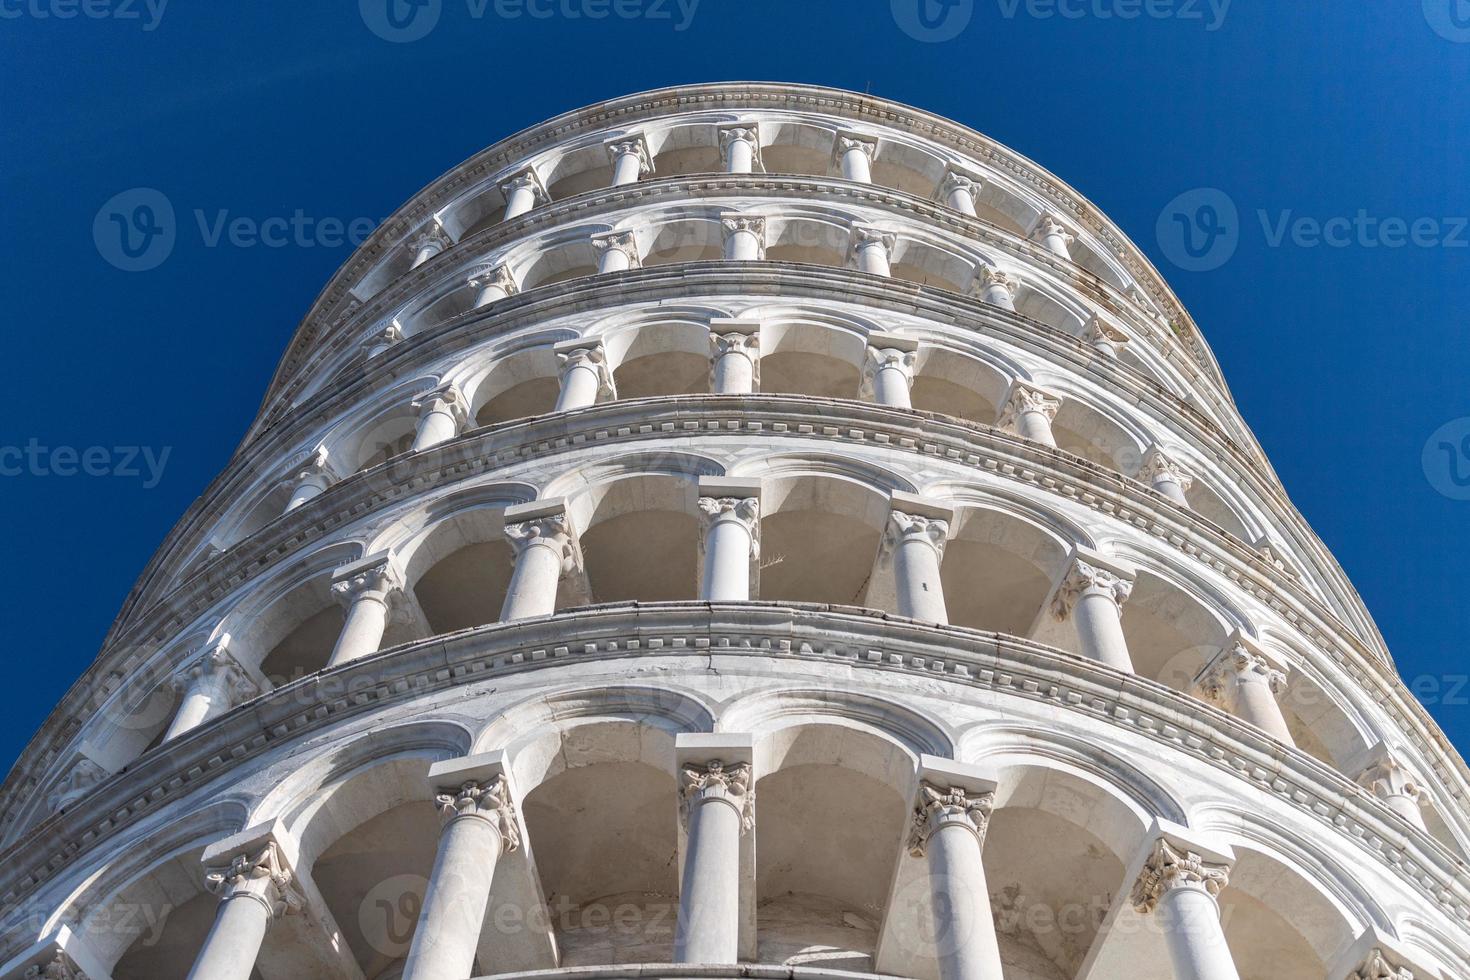 pisa dome and leaning tower close up detail view photo